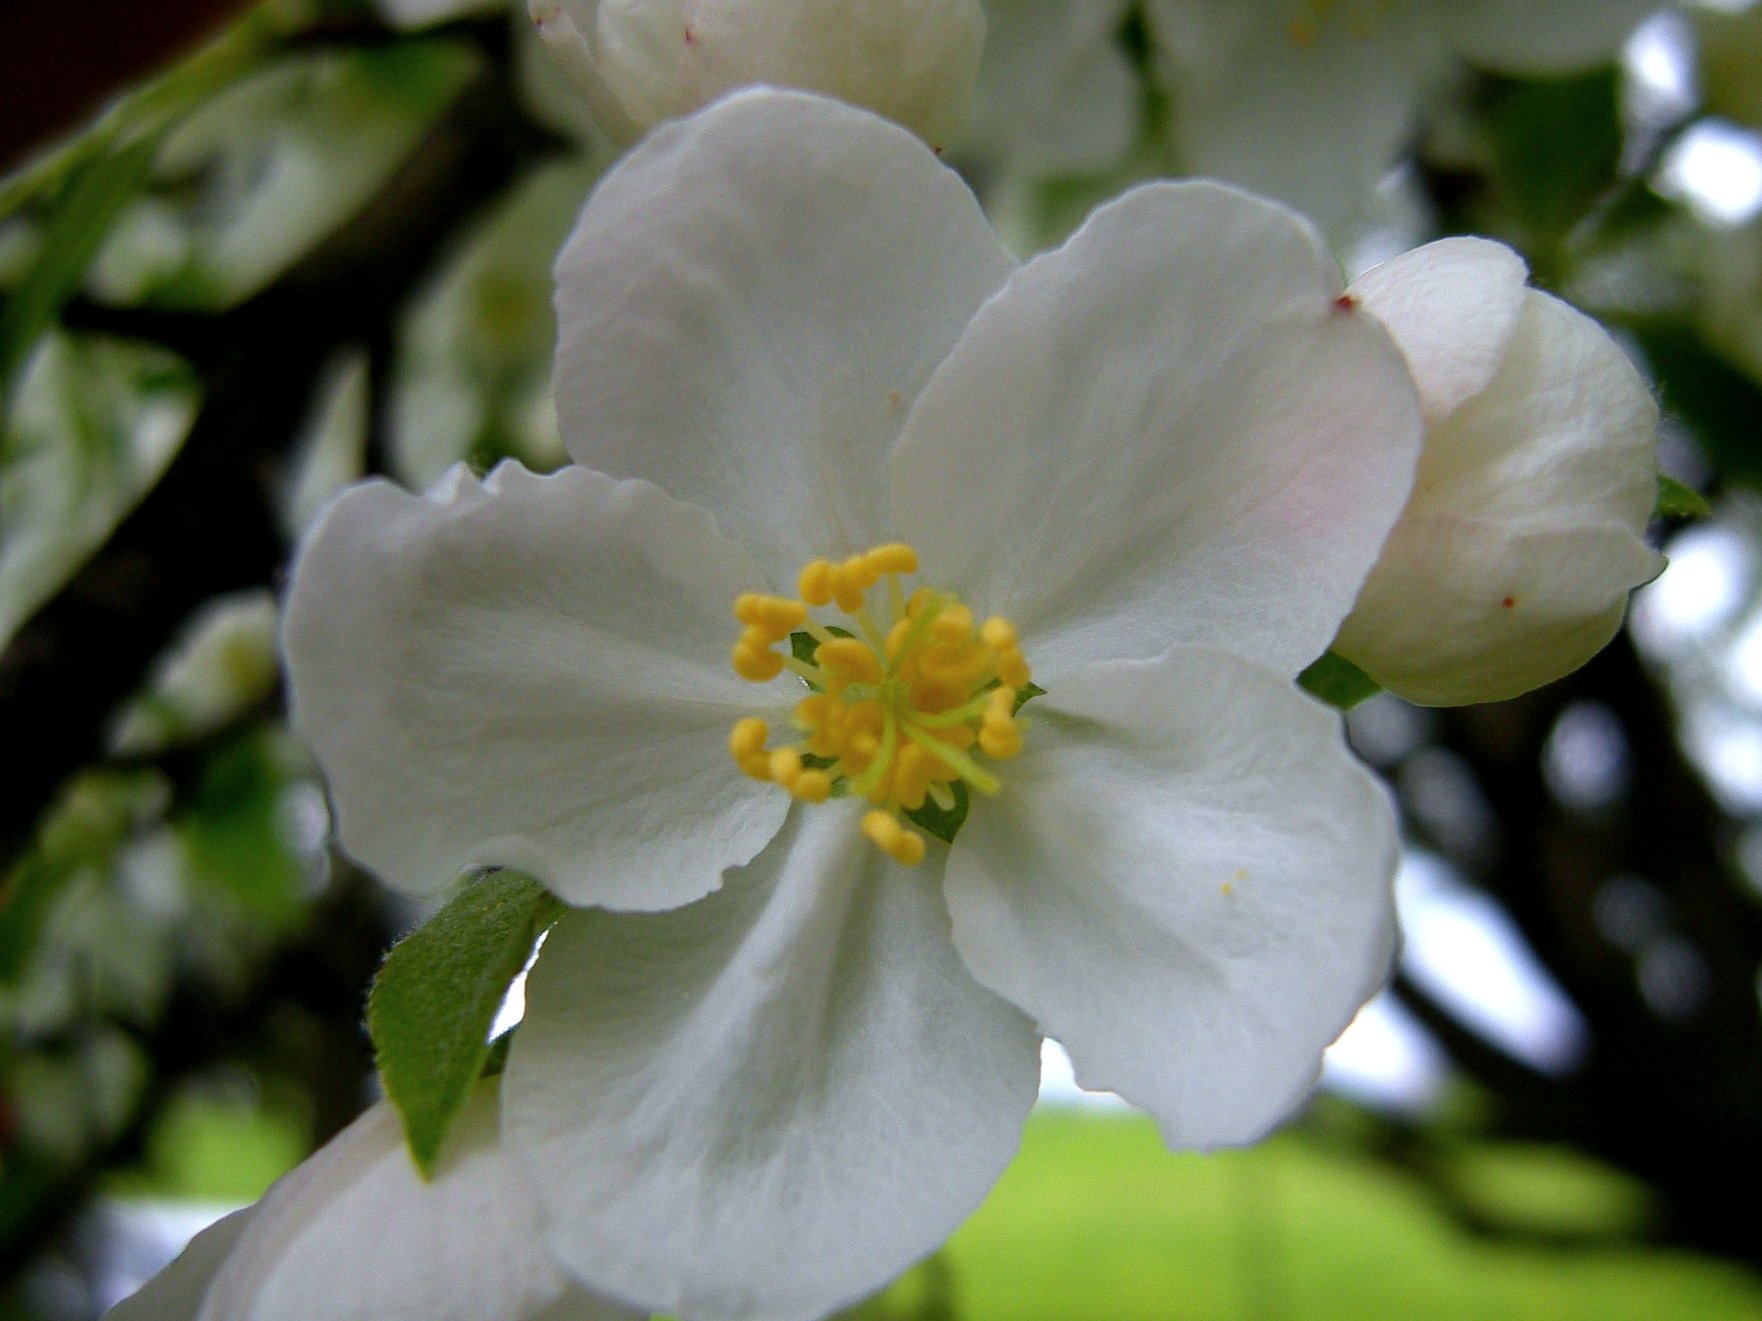 white flowers are blooming on a tree nch